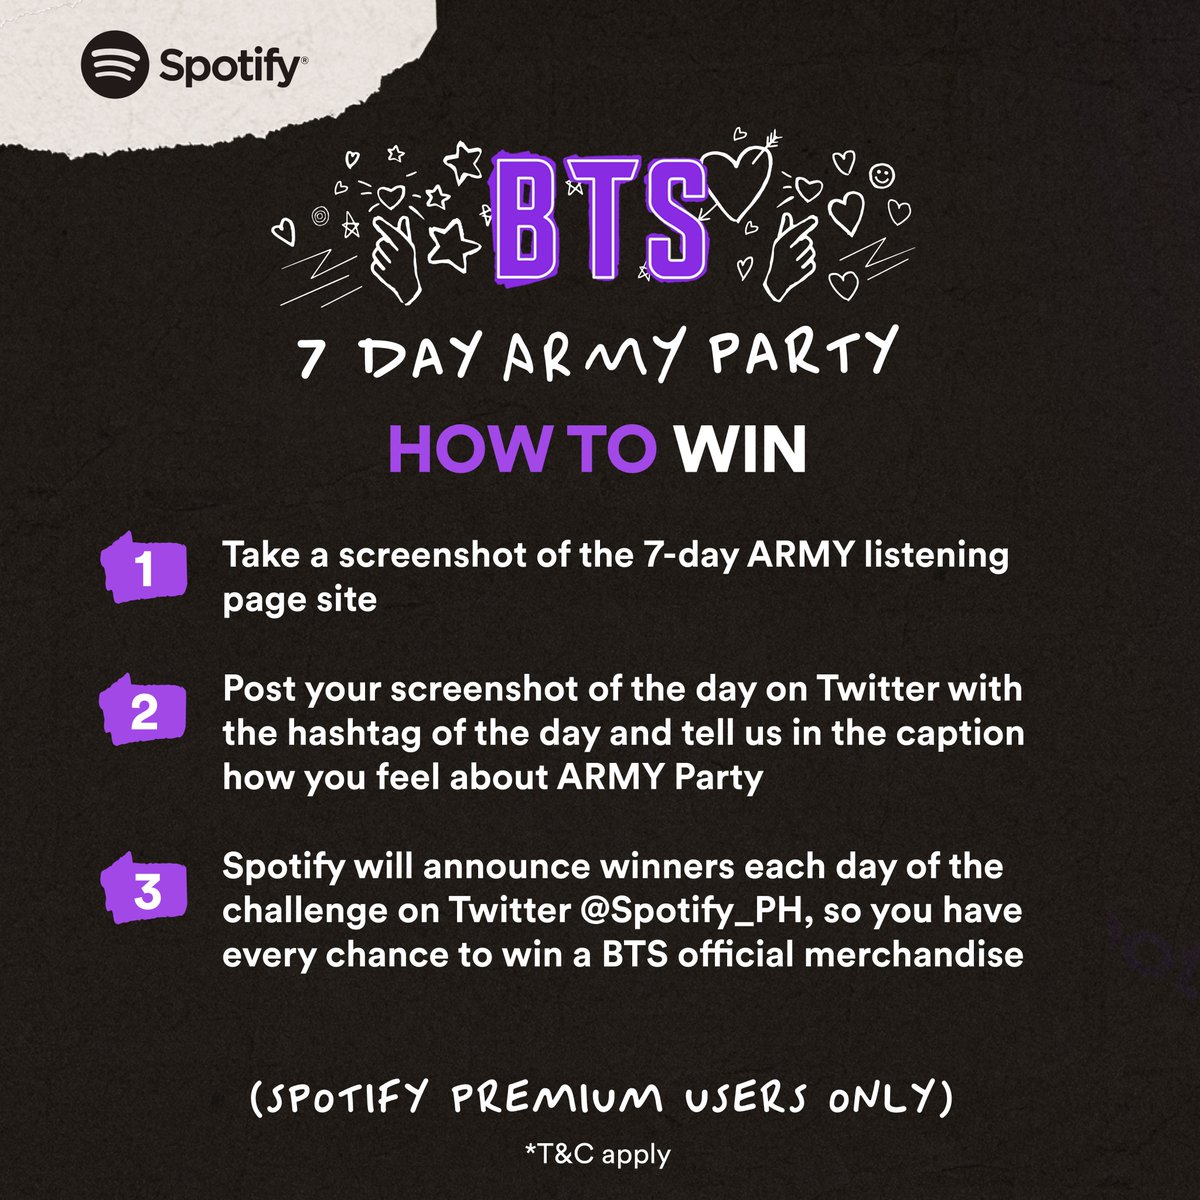 It’s official, Filo ARMY. Proof era just got more exciting with our #7DayARMYParty 💜 Listen to a new, curated BTS playlist everyday from June 17-23 on 7dayarmyparty.byspotify.com There’ll be a competition for you to win exclusive BTS merch, too! #SpotifyPurpleU #SpotifyxBTS